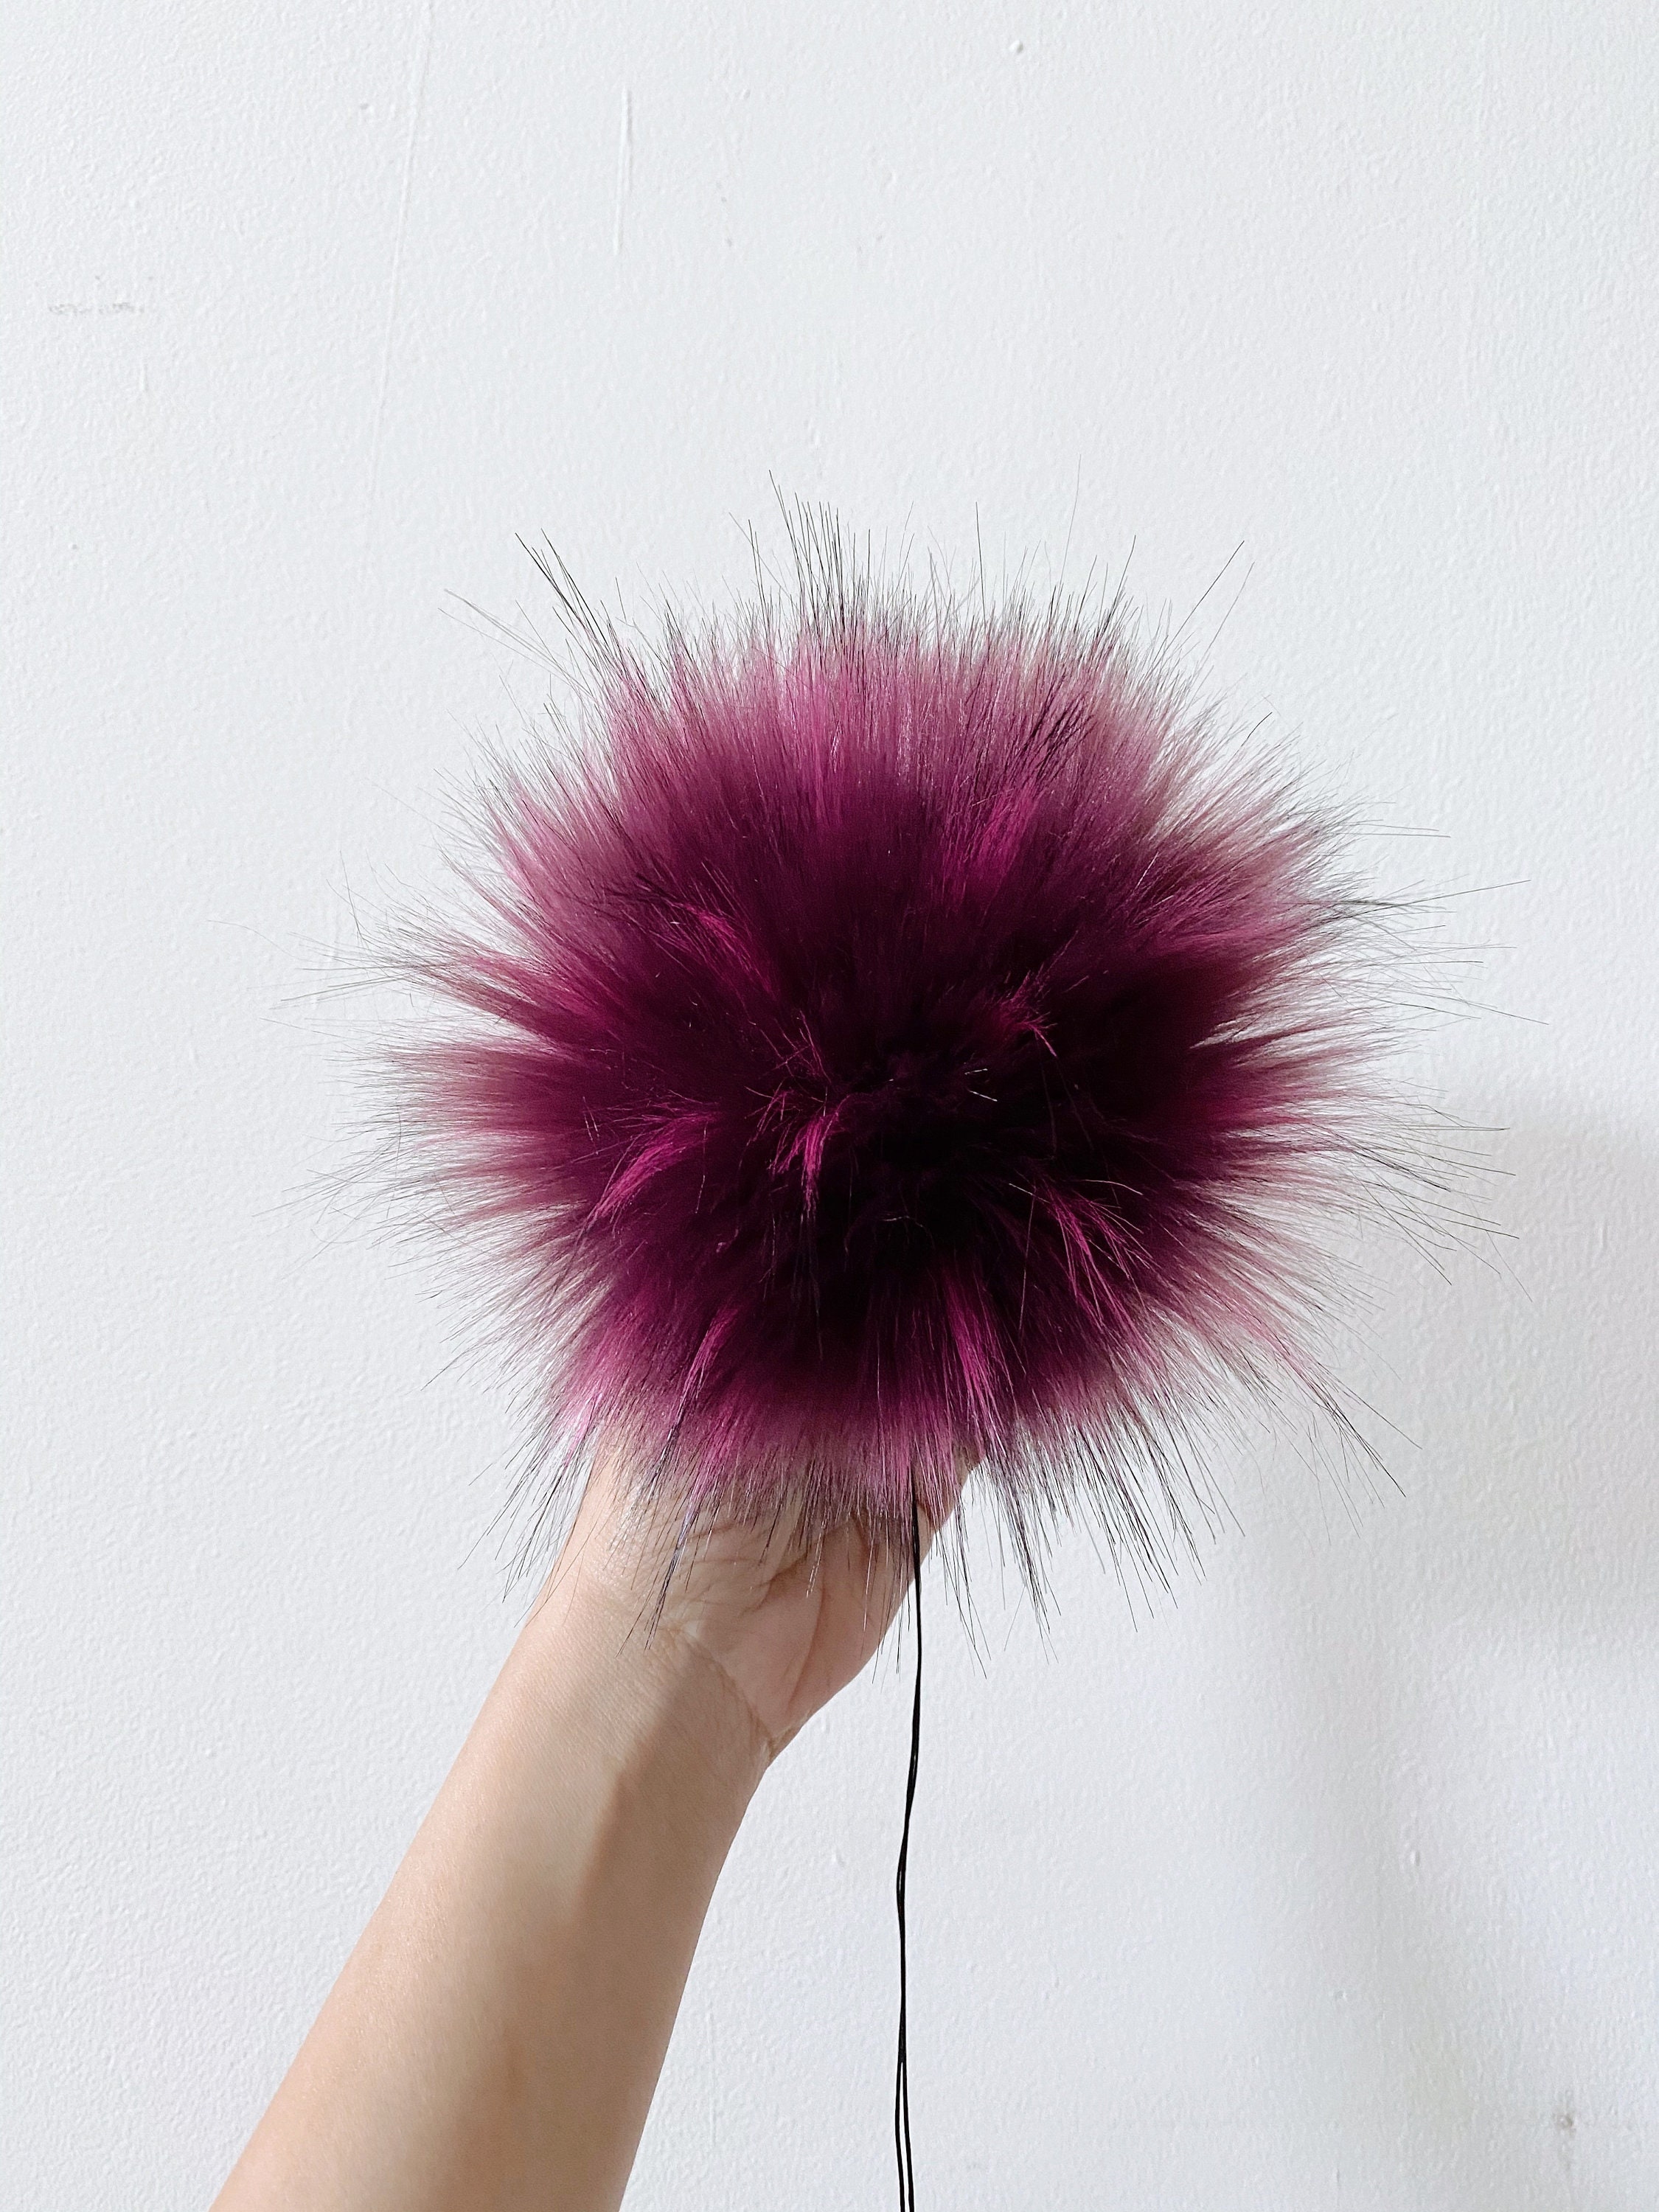 Bememo 14 Pieces Faux Fur Pom Pom Ball Fluffy Pompom Ball Hat Faux Fox Fur Pom Pom Balls with Removable Press Button for Knitting Hat Gloves Keychains